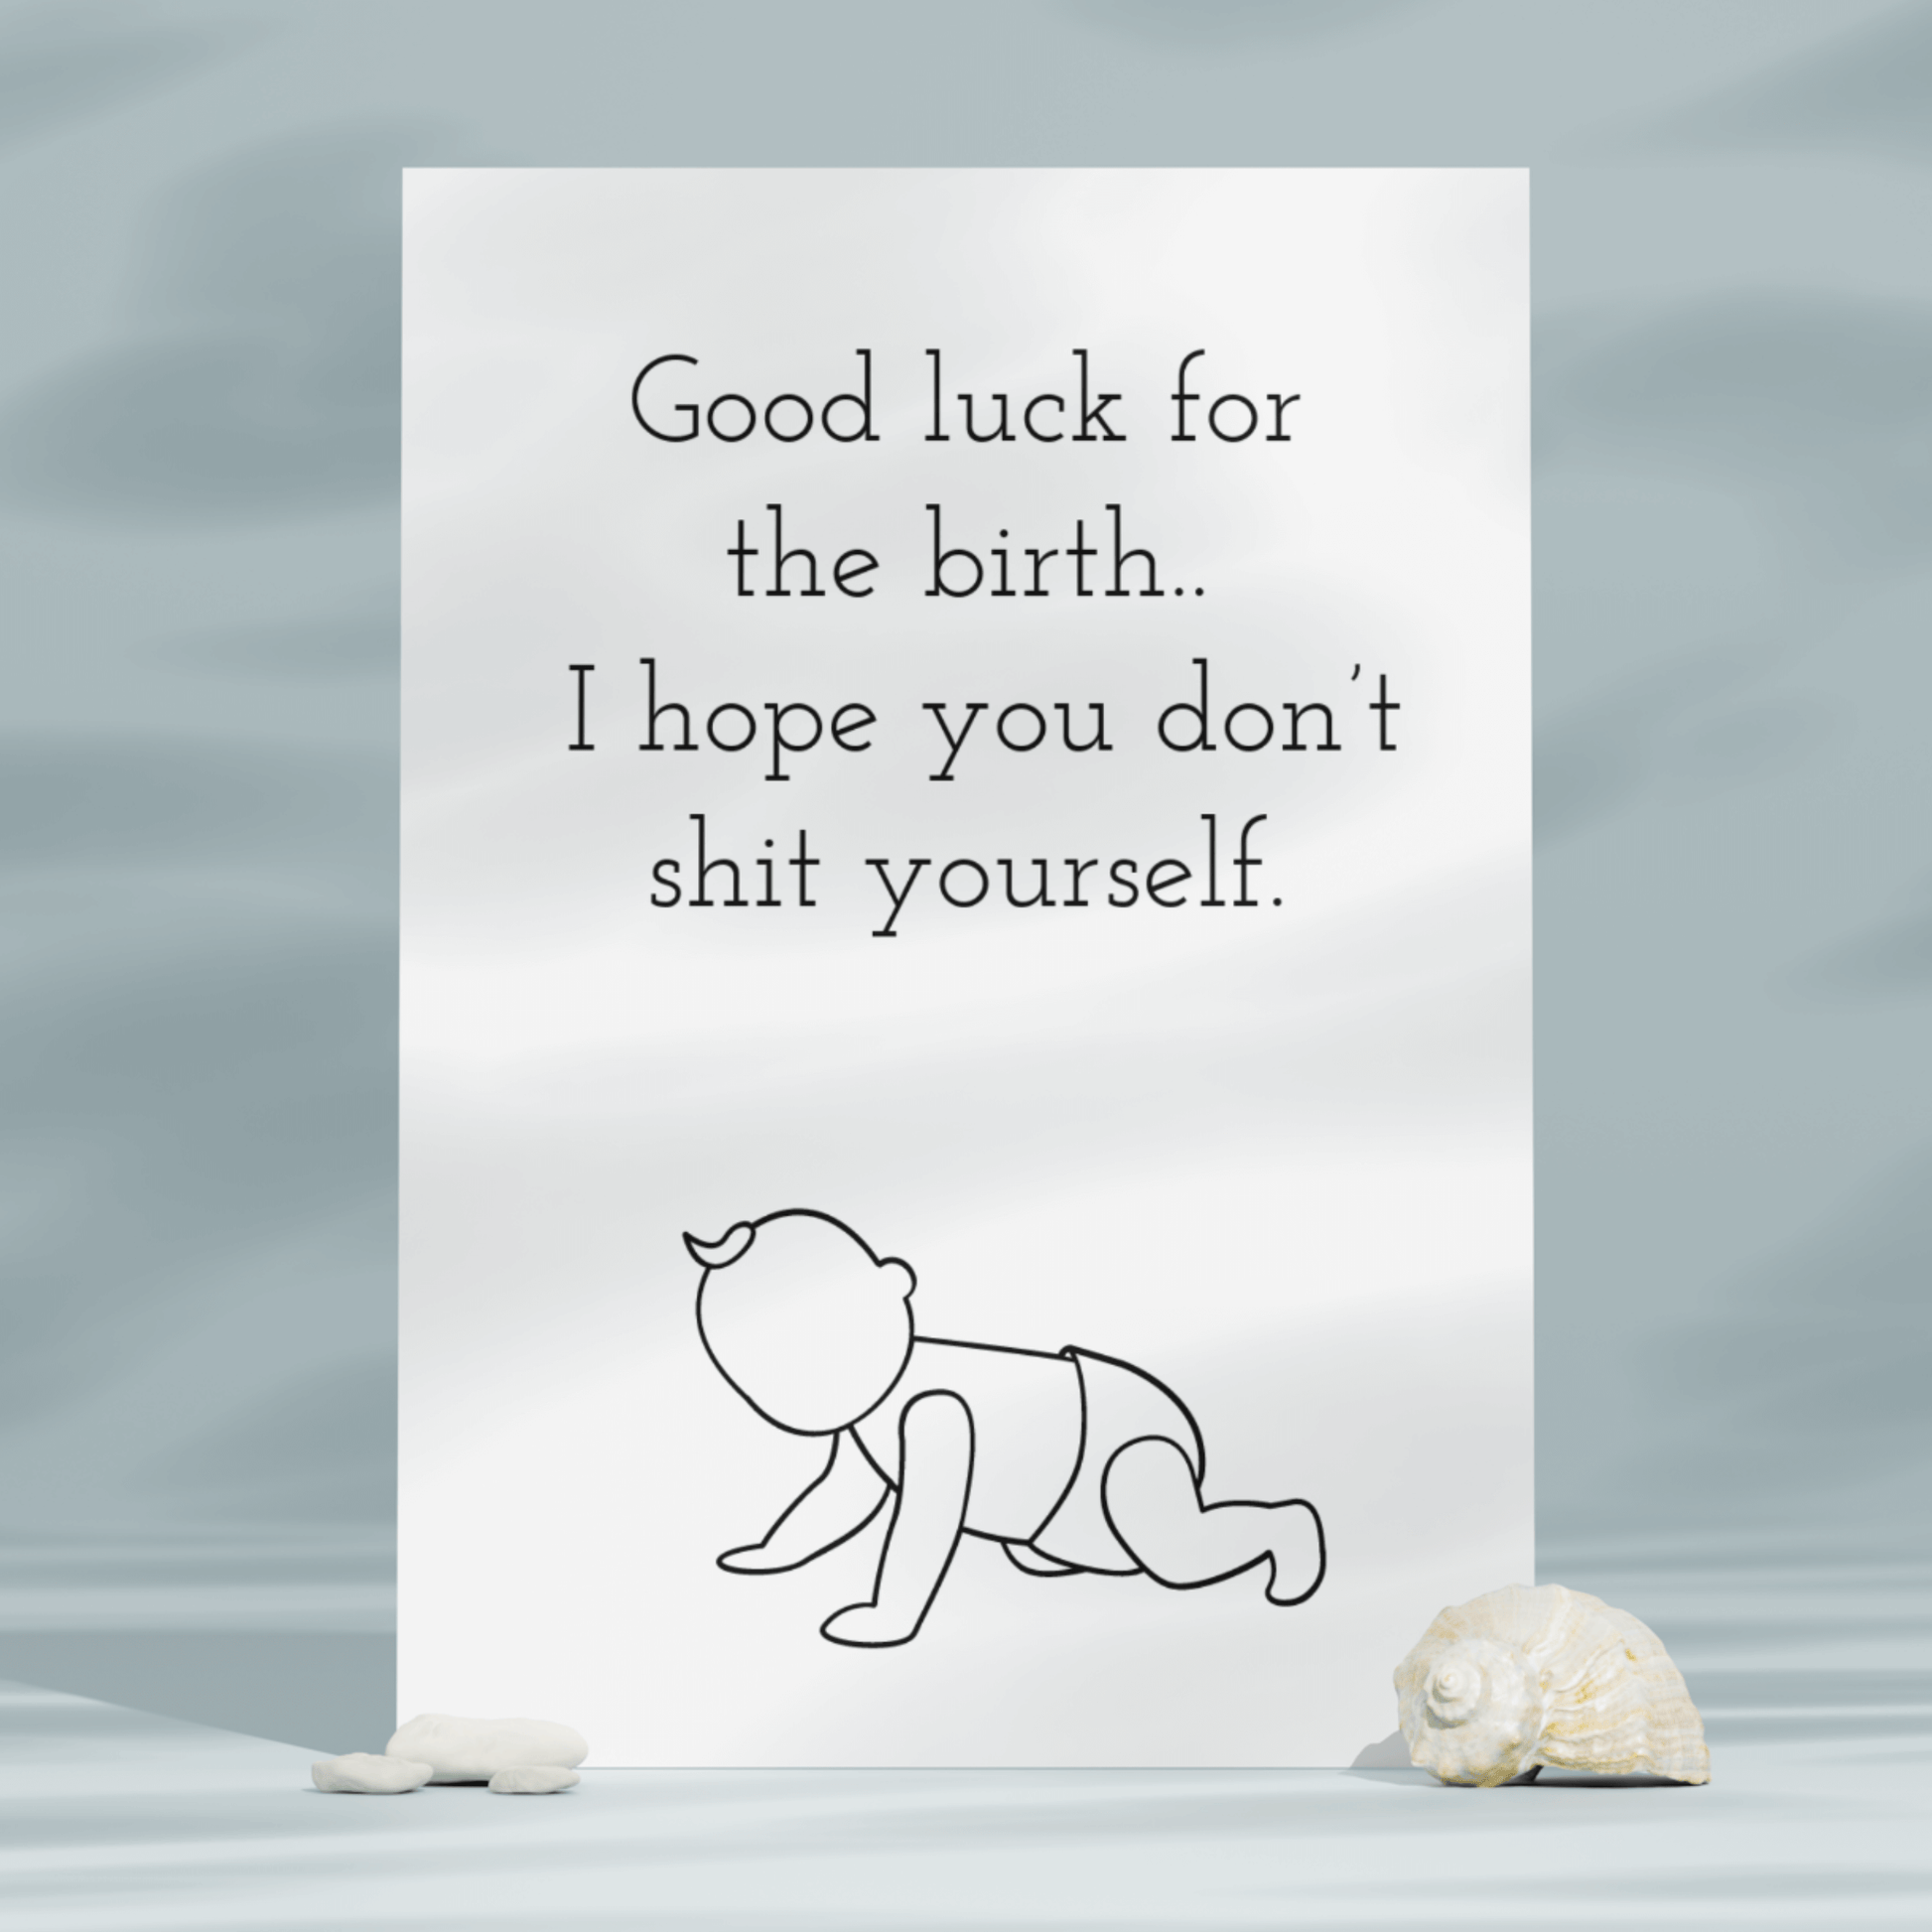 Little Kraken's I Hope You Don't Shit Yourself, New Baby Cards for £3.50 each